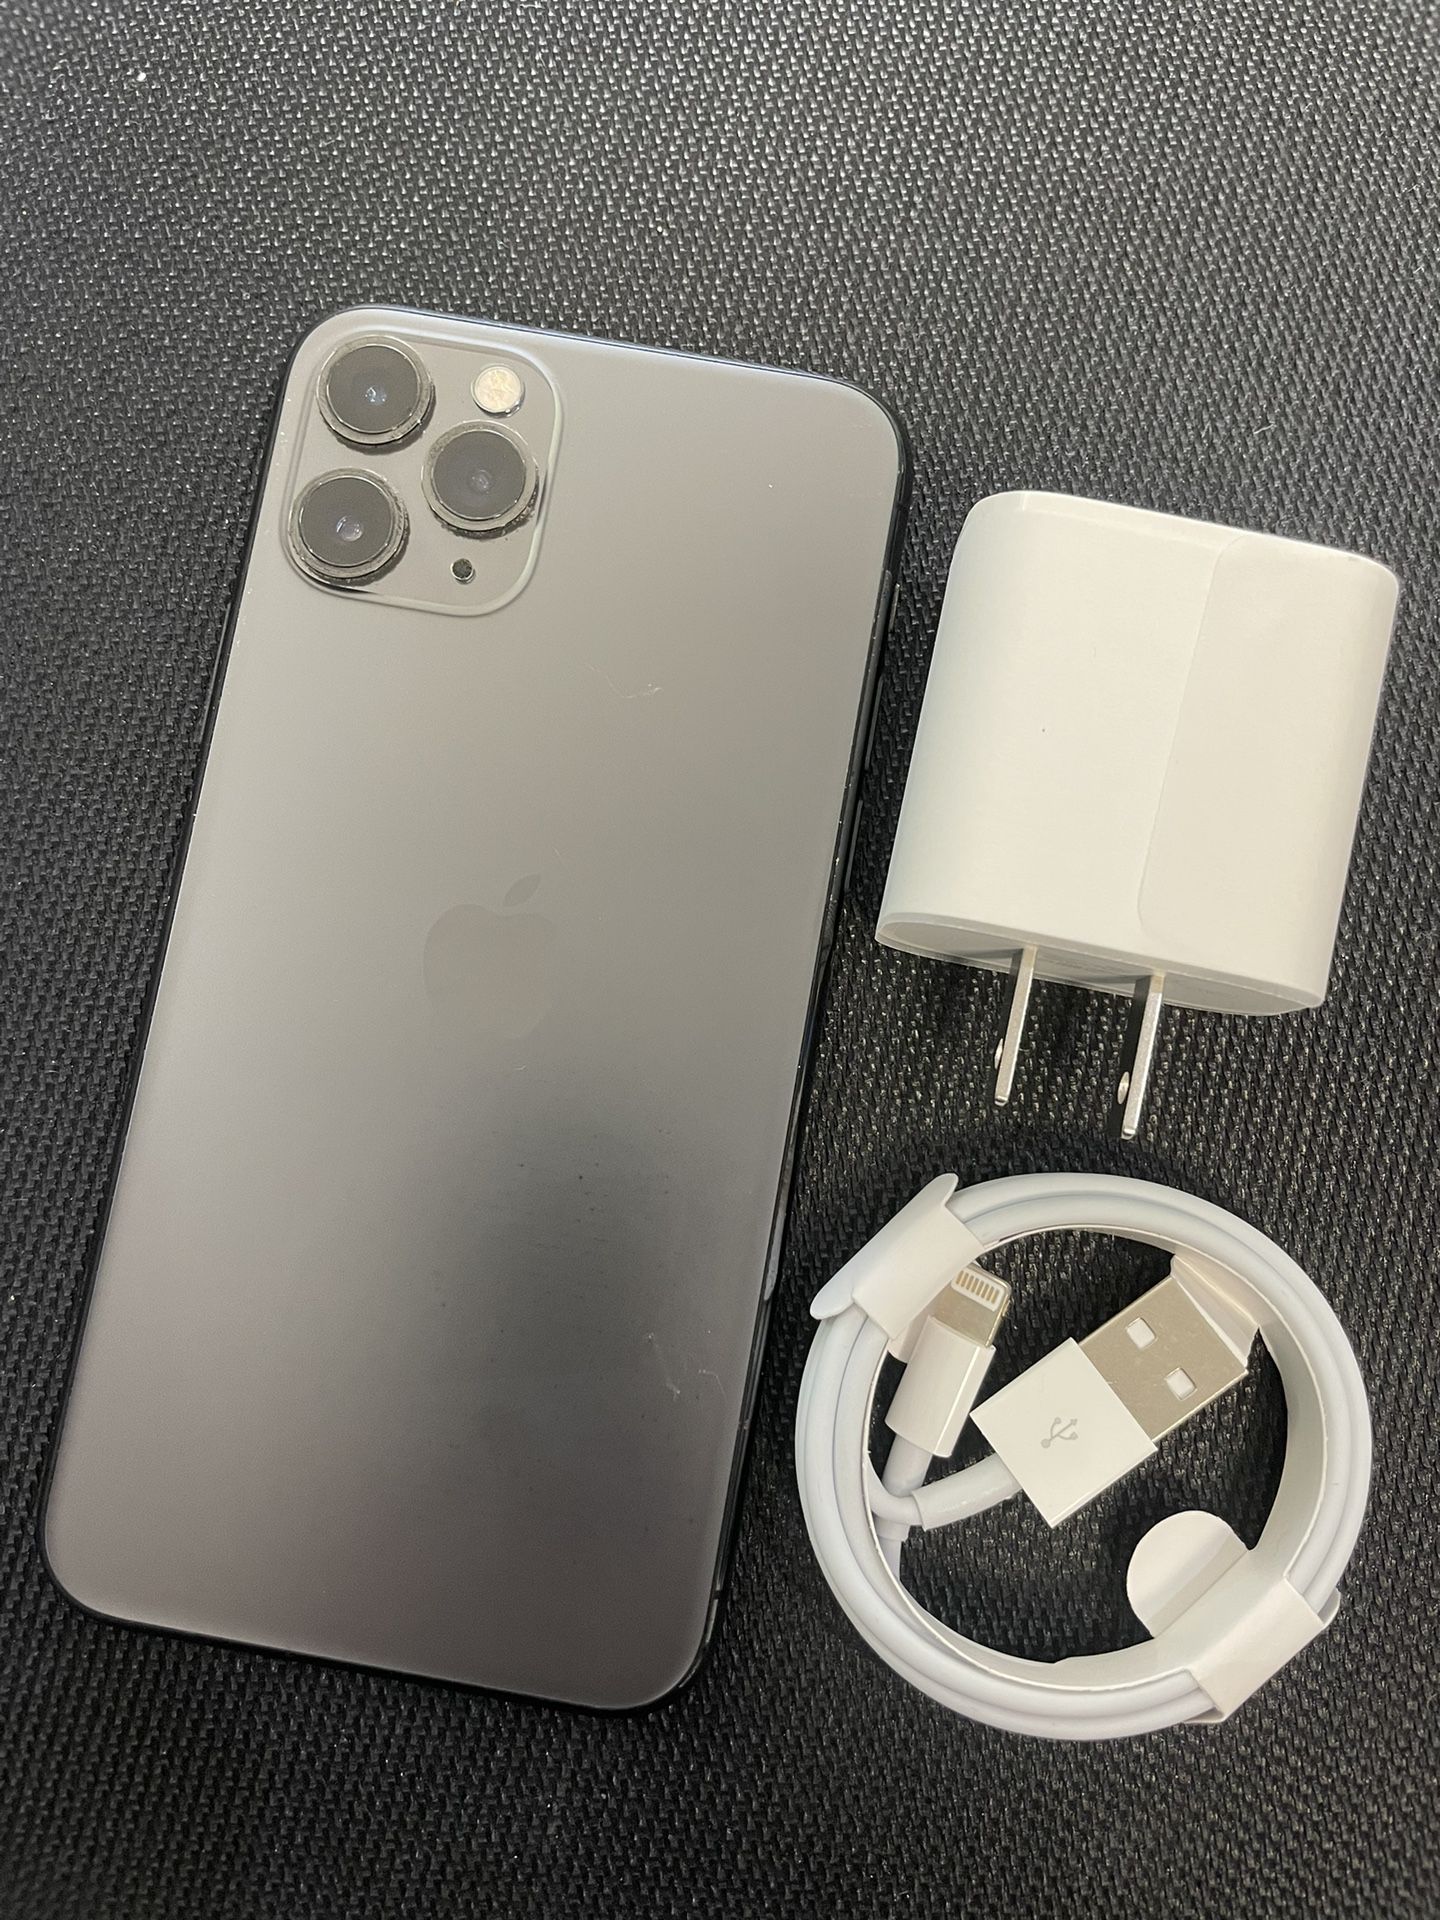 Factory Unlocked Apple iPhone 11 Pro 64gb, sold with warranty 